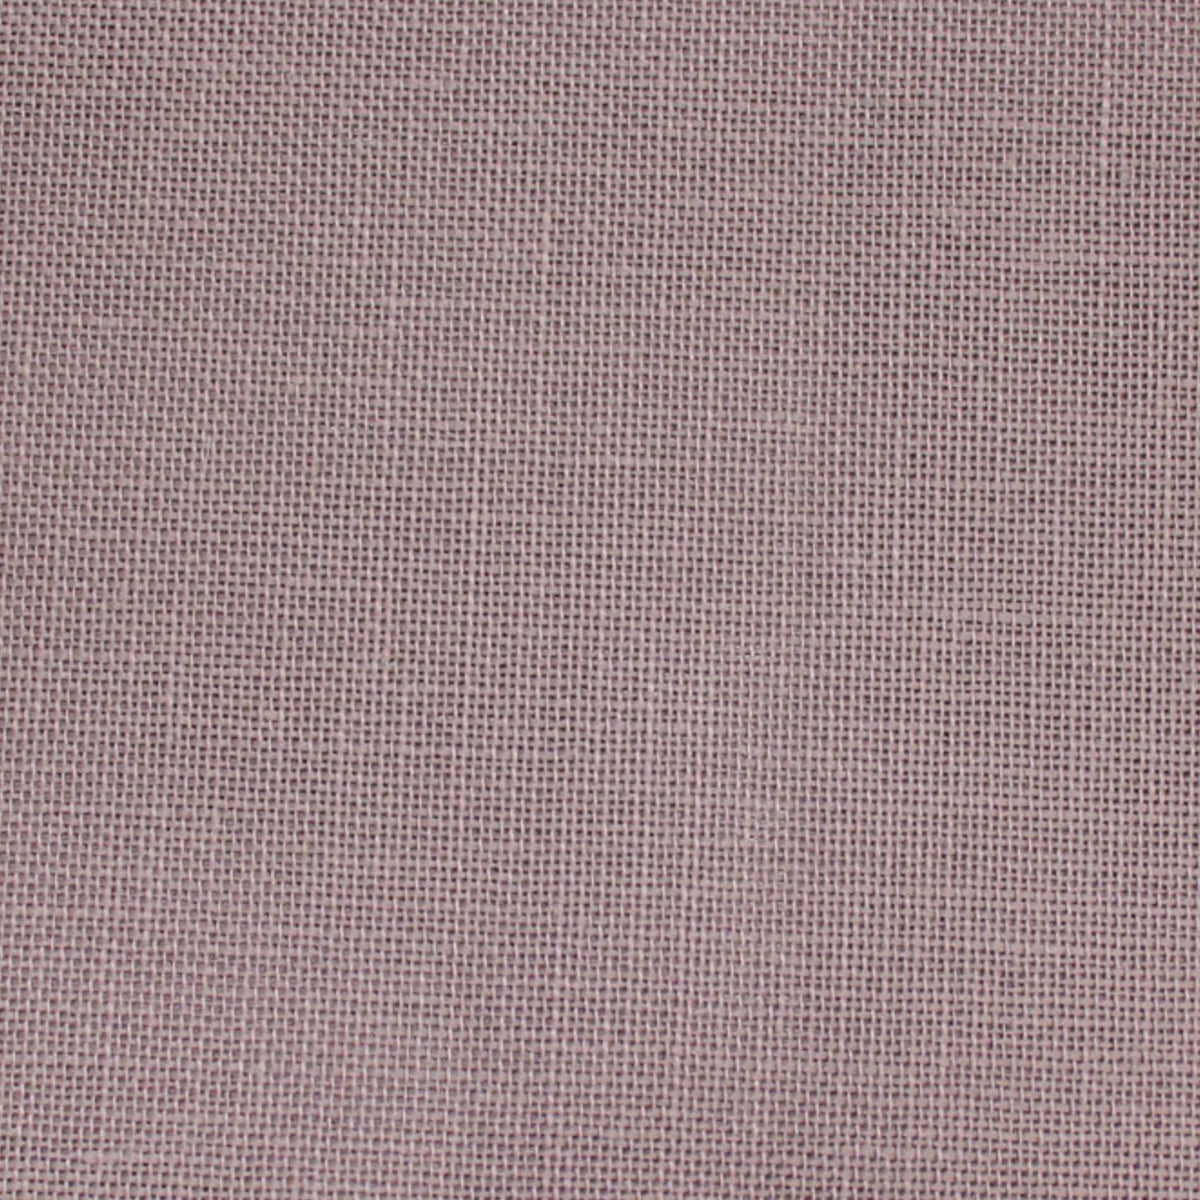 Linen 28 count - French Country - Sewfinity.com